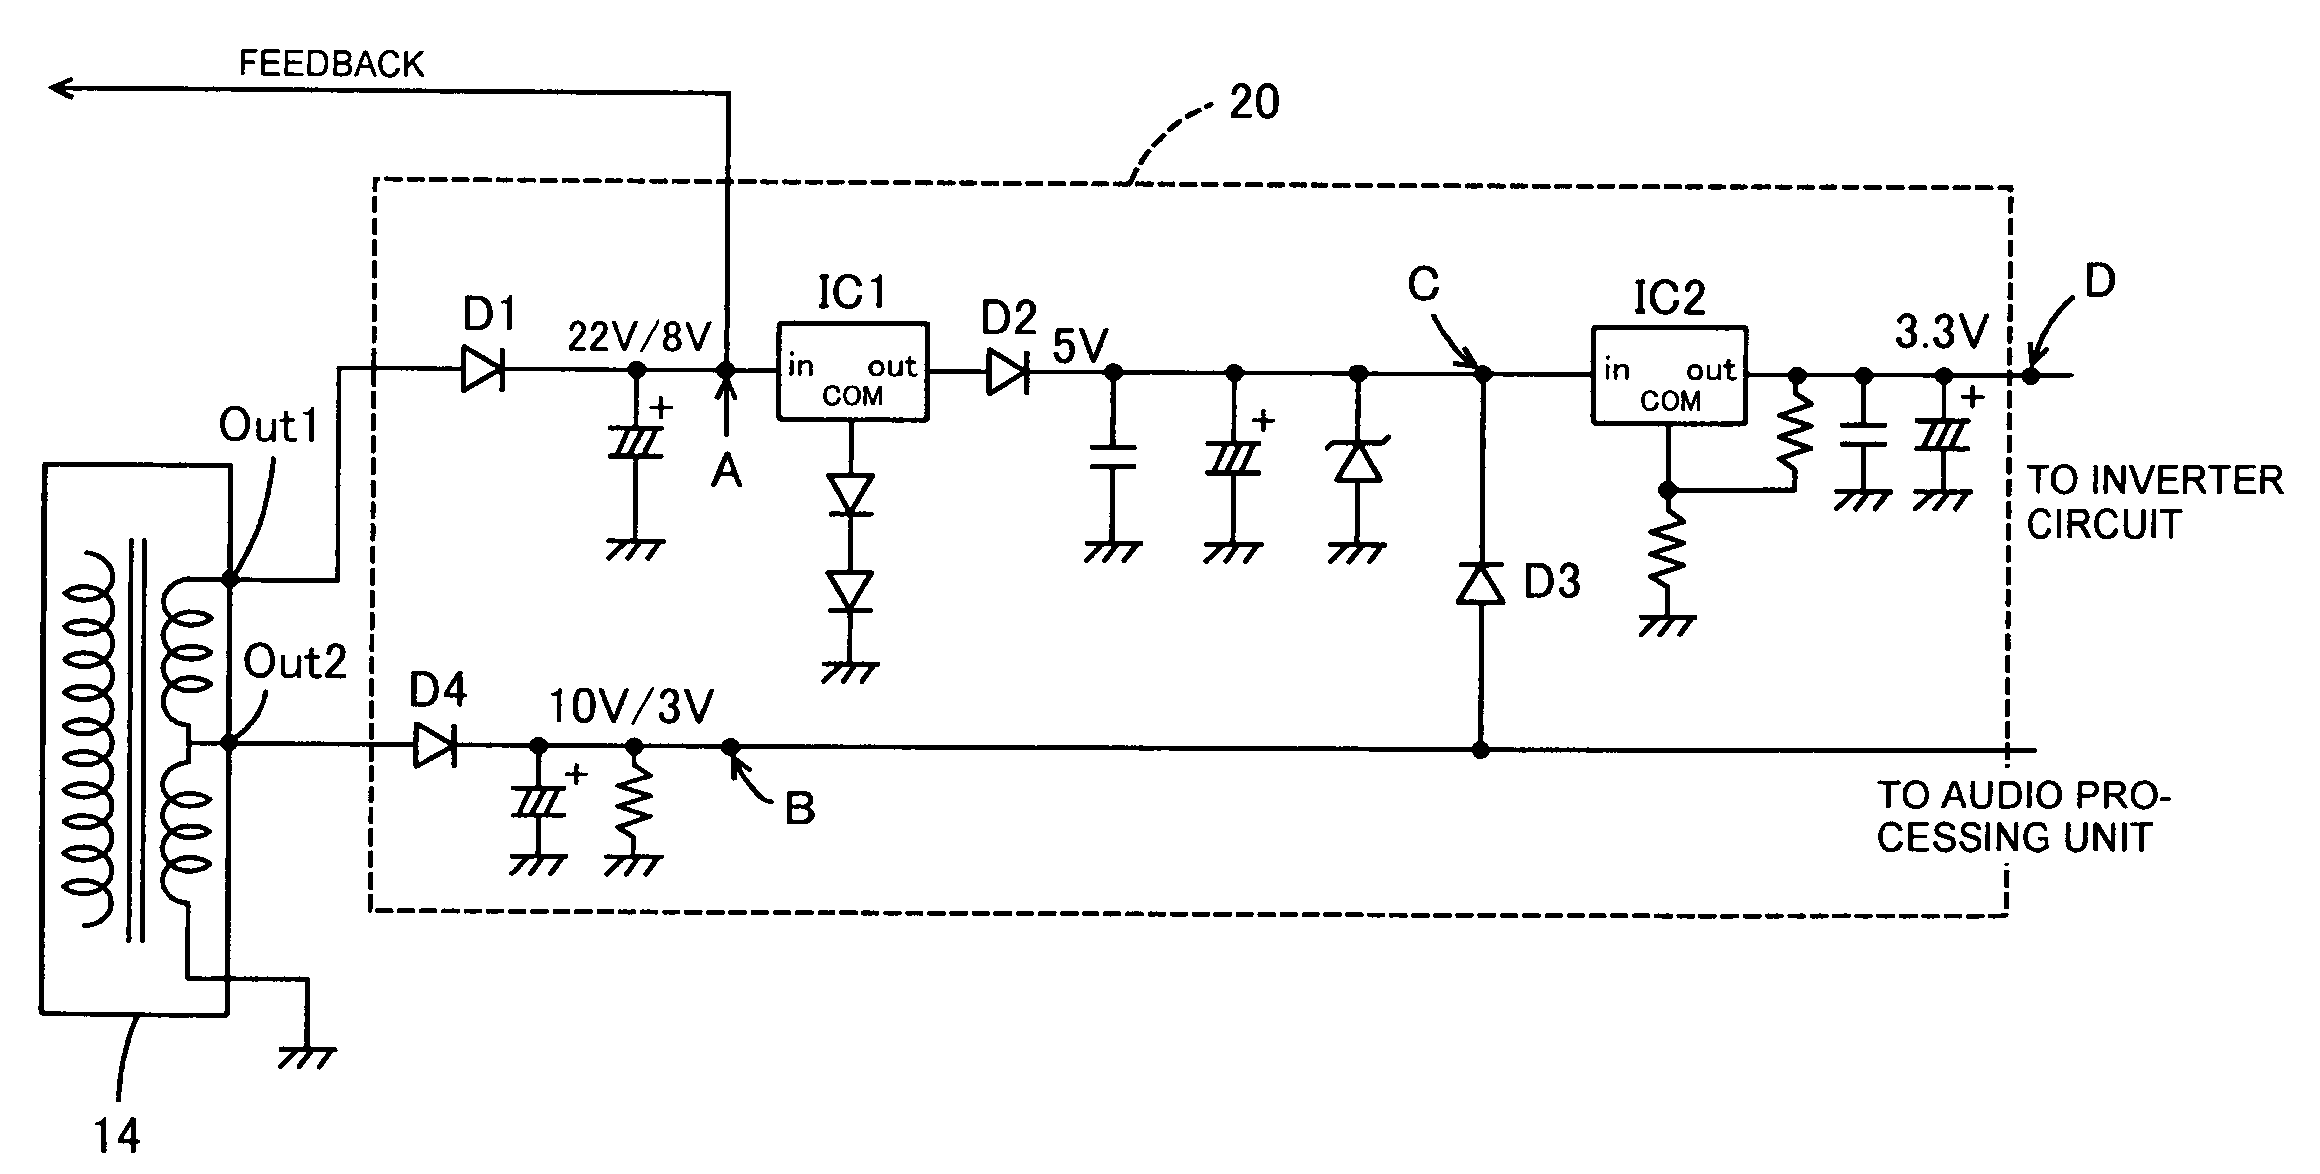 Voltage for LCD